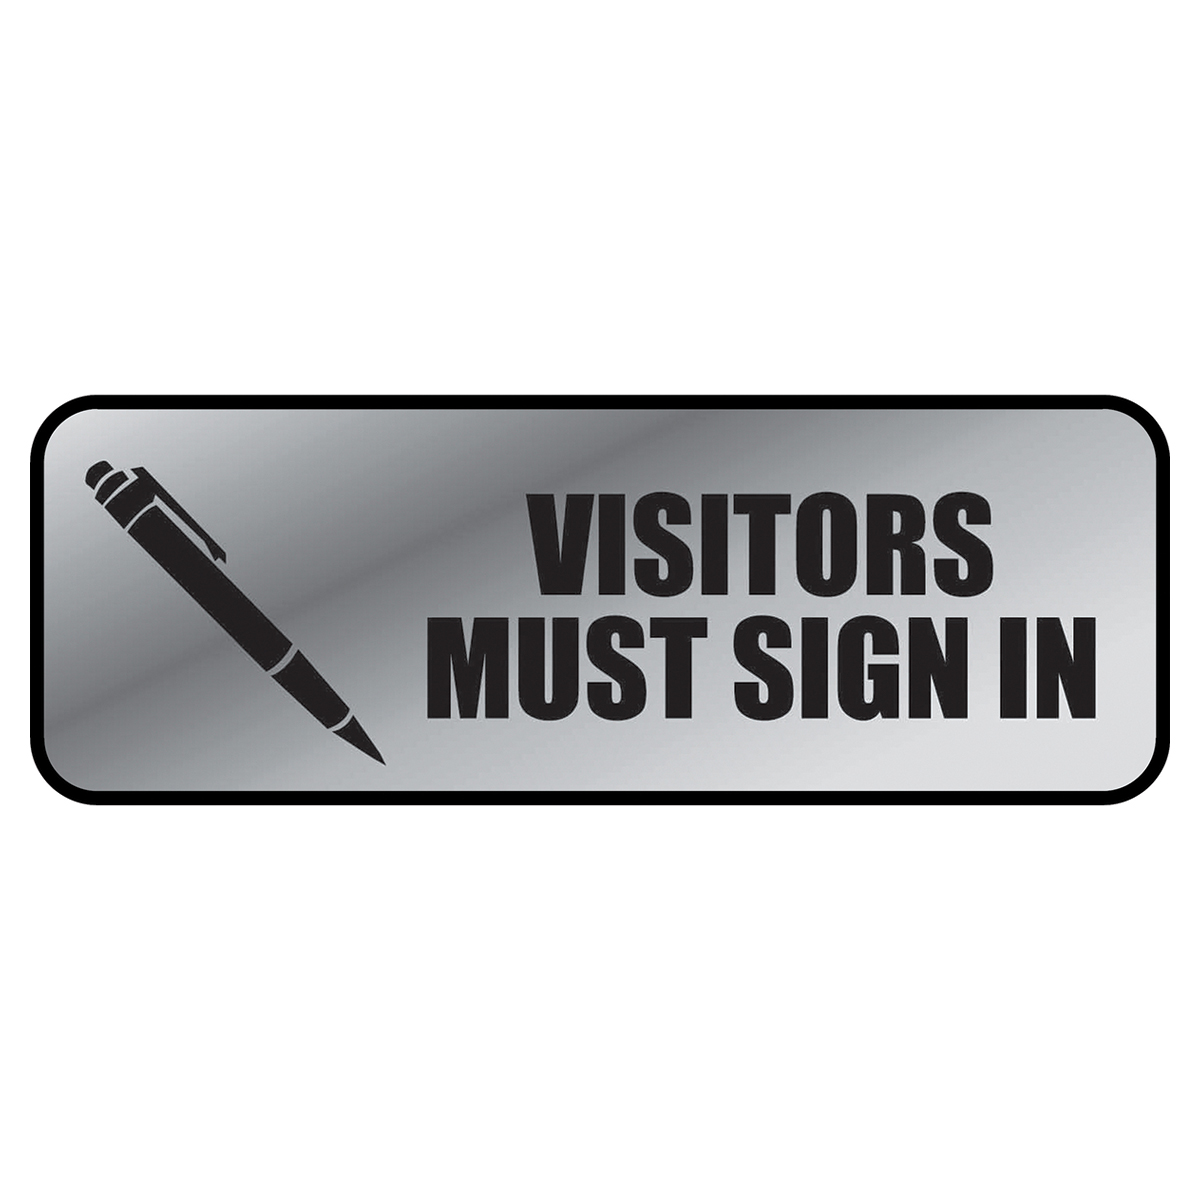 VISITORS MUST SIGN IN - Metal Sign - 098212